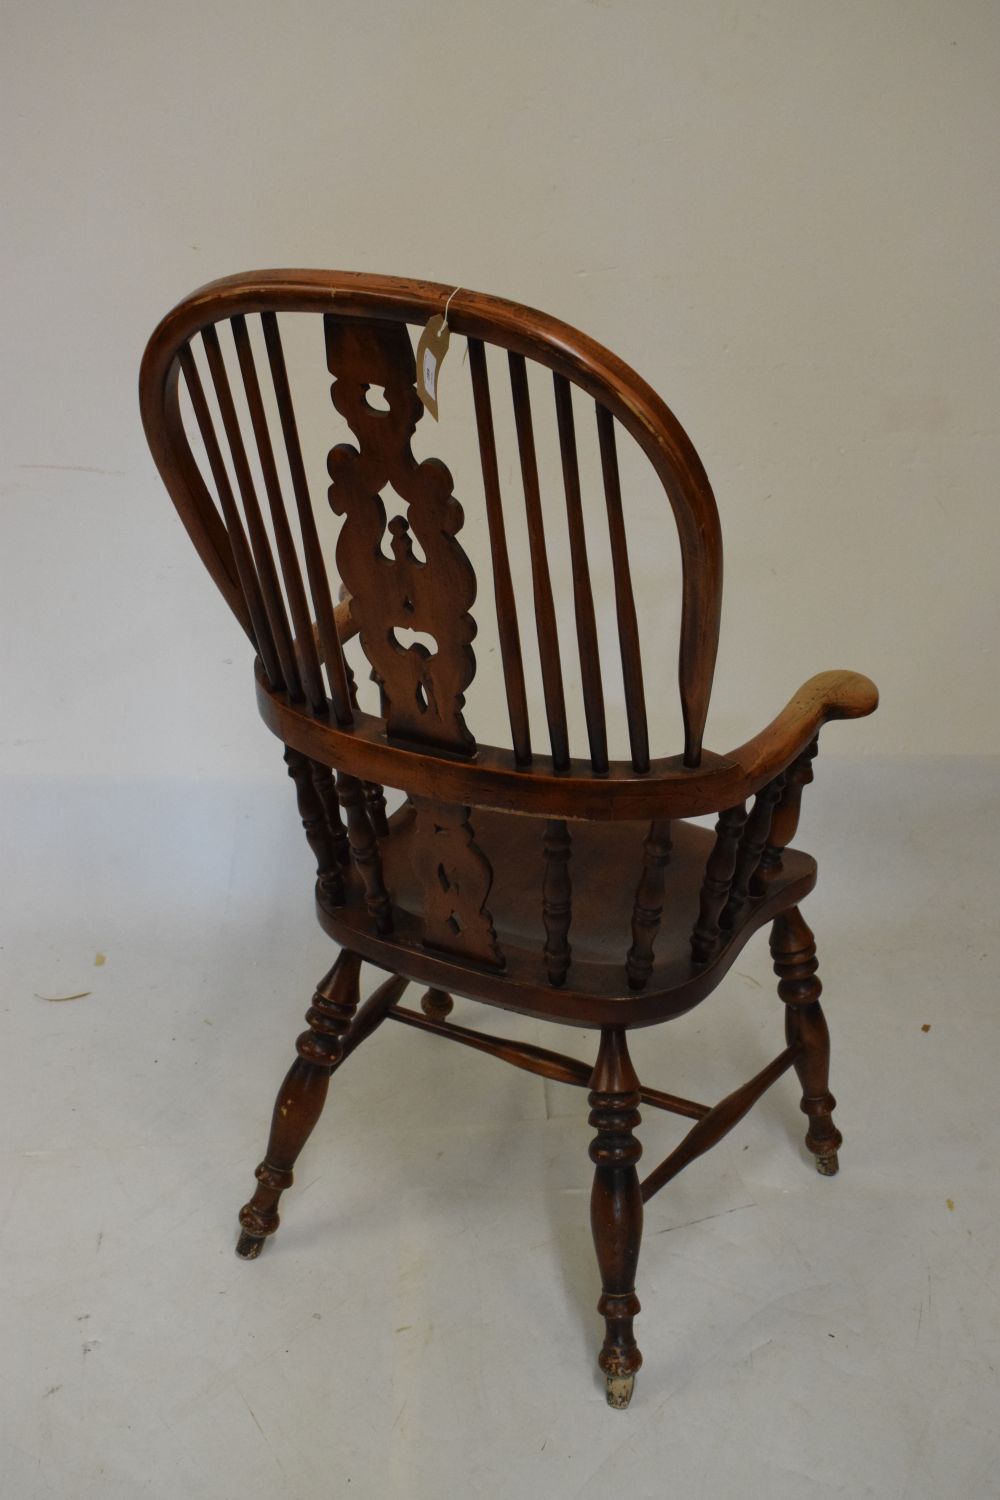 Reproduction elm seat Windsor stickback elbow chair - Image 5 of 6